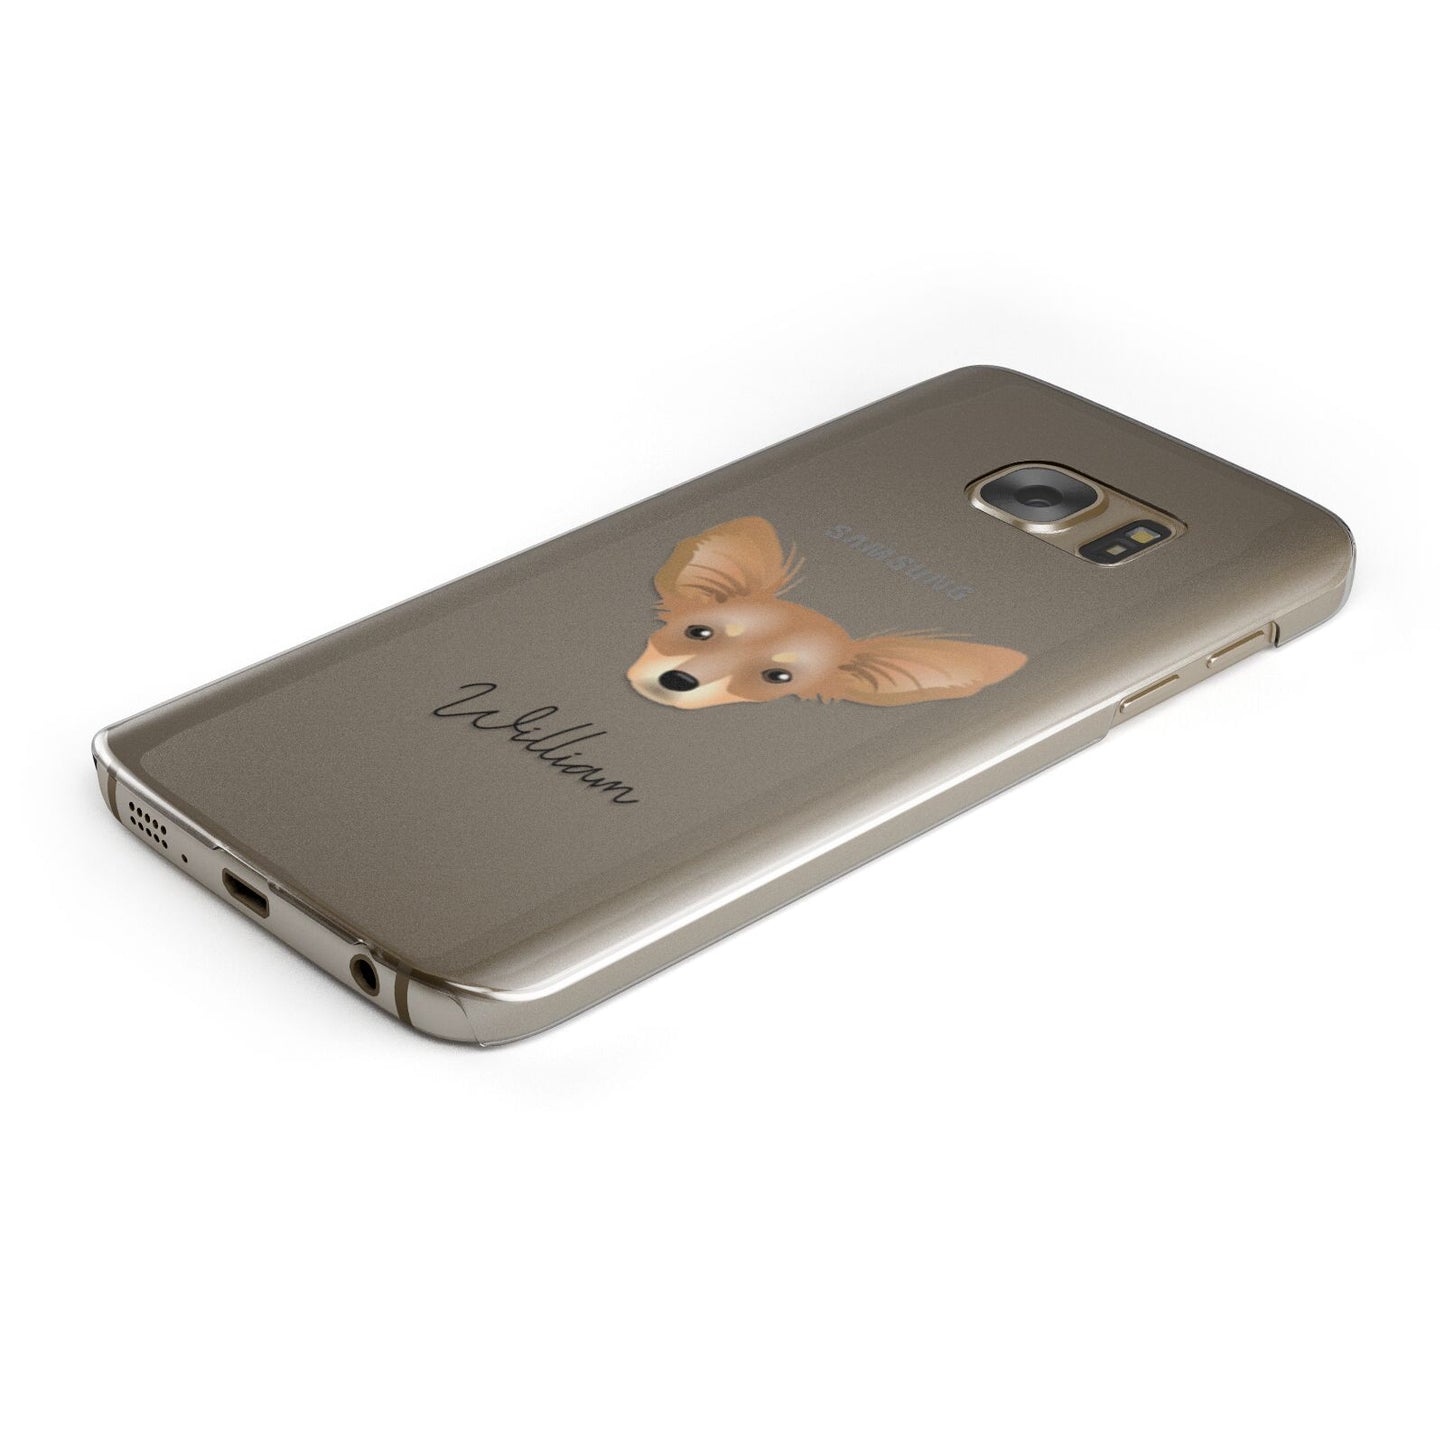 Russian Toy Personalised Samsung Galaxy Case Bottom Cutout